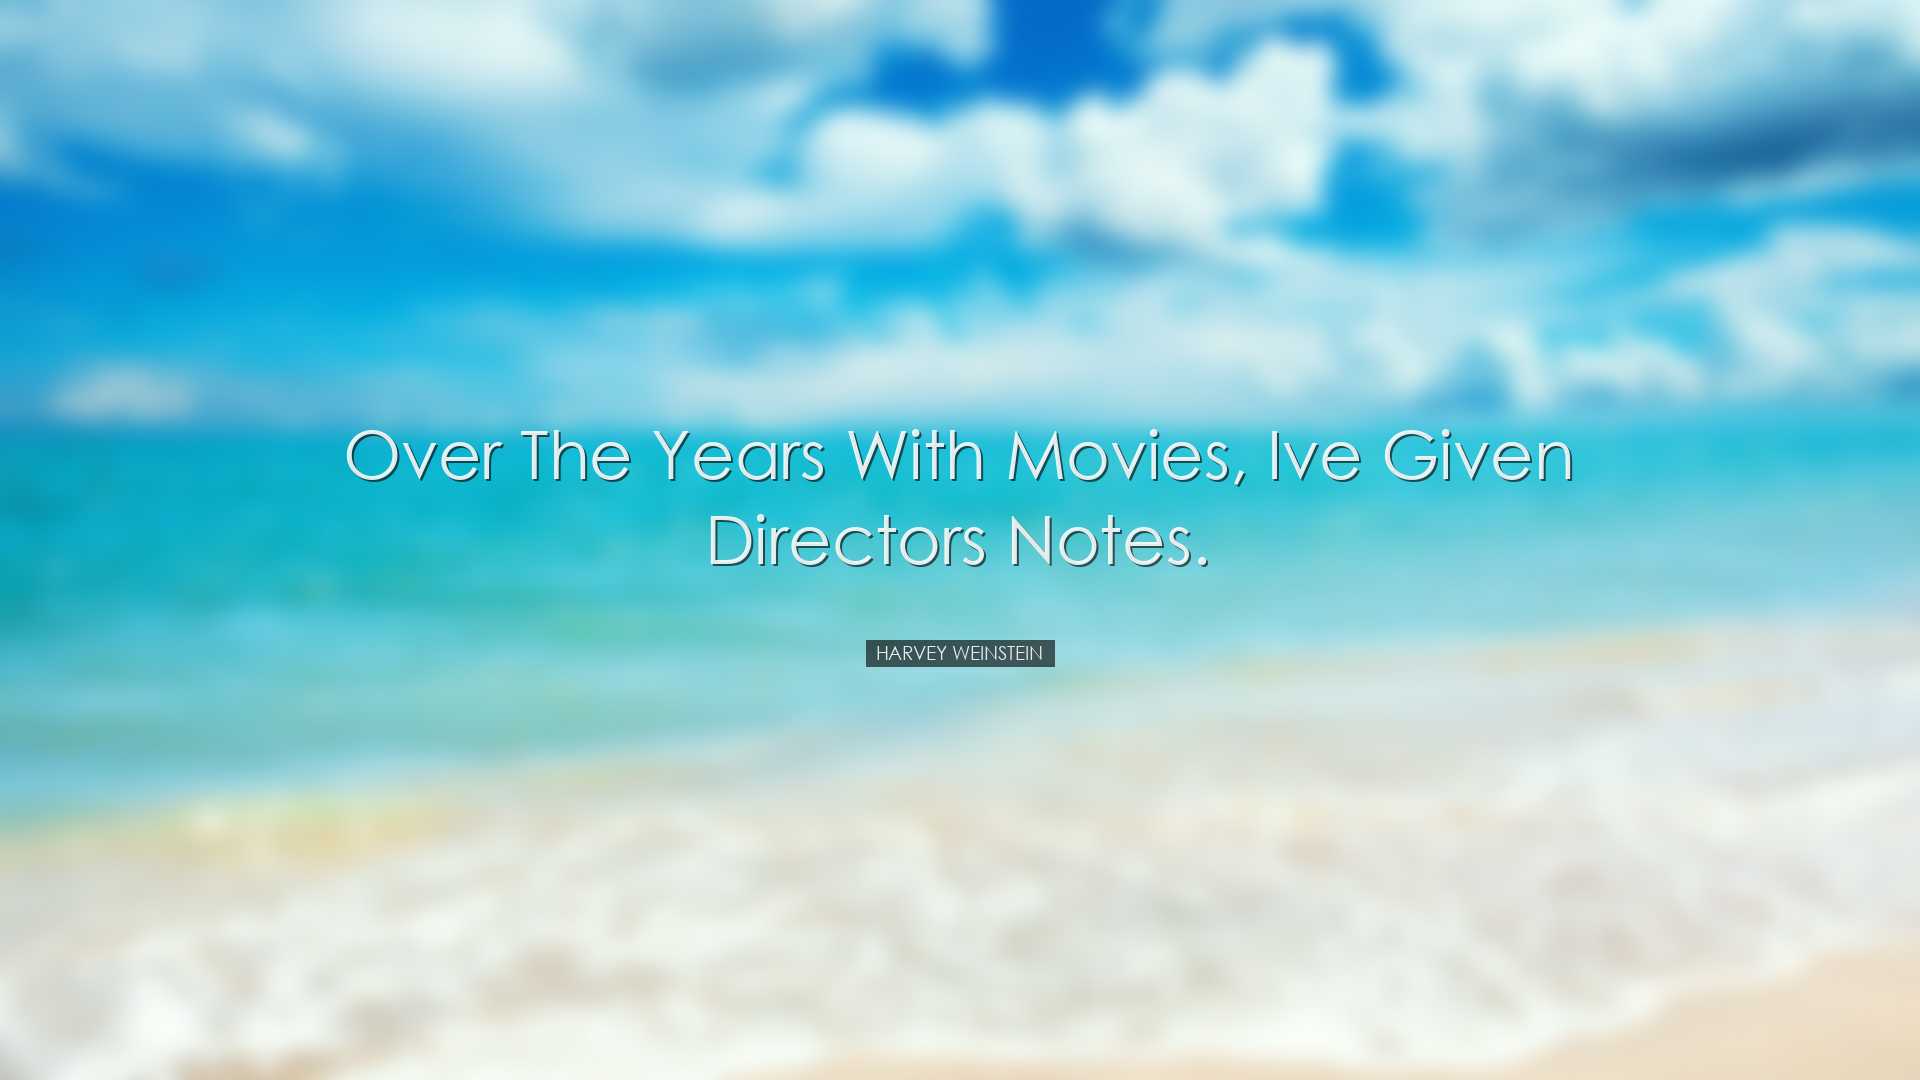 Over the years with movies, Ive given directors notes. - Harvey We